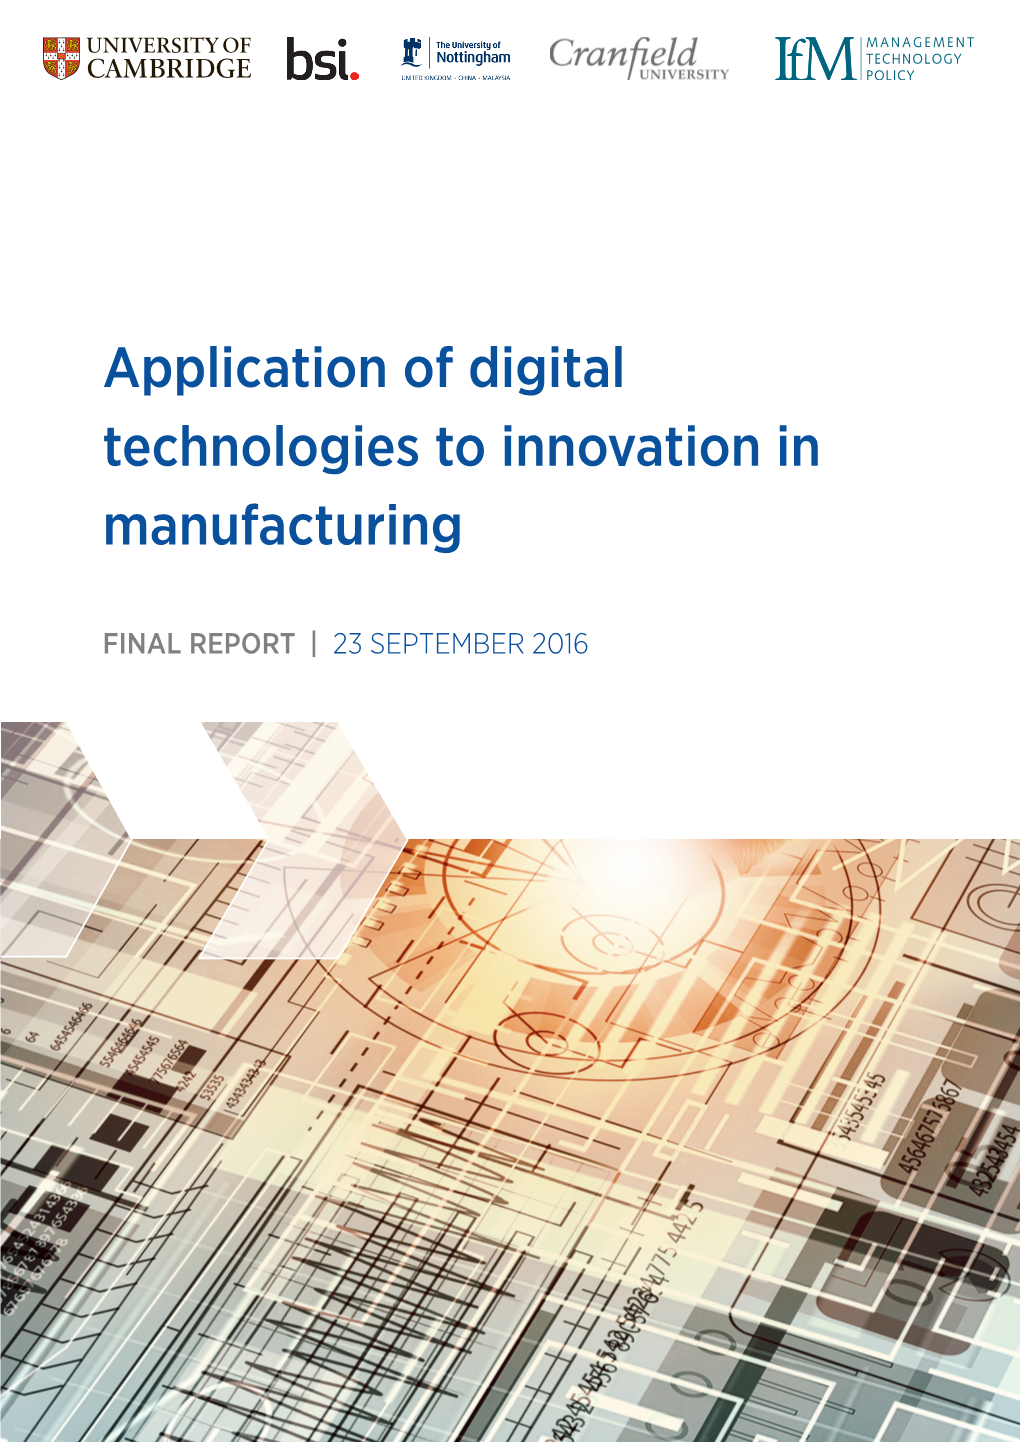 Application of Digital Technologies to Innovation in Manufacturing